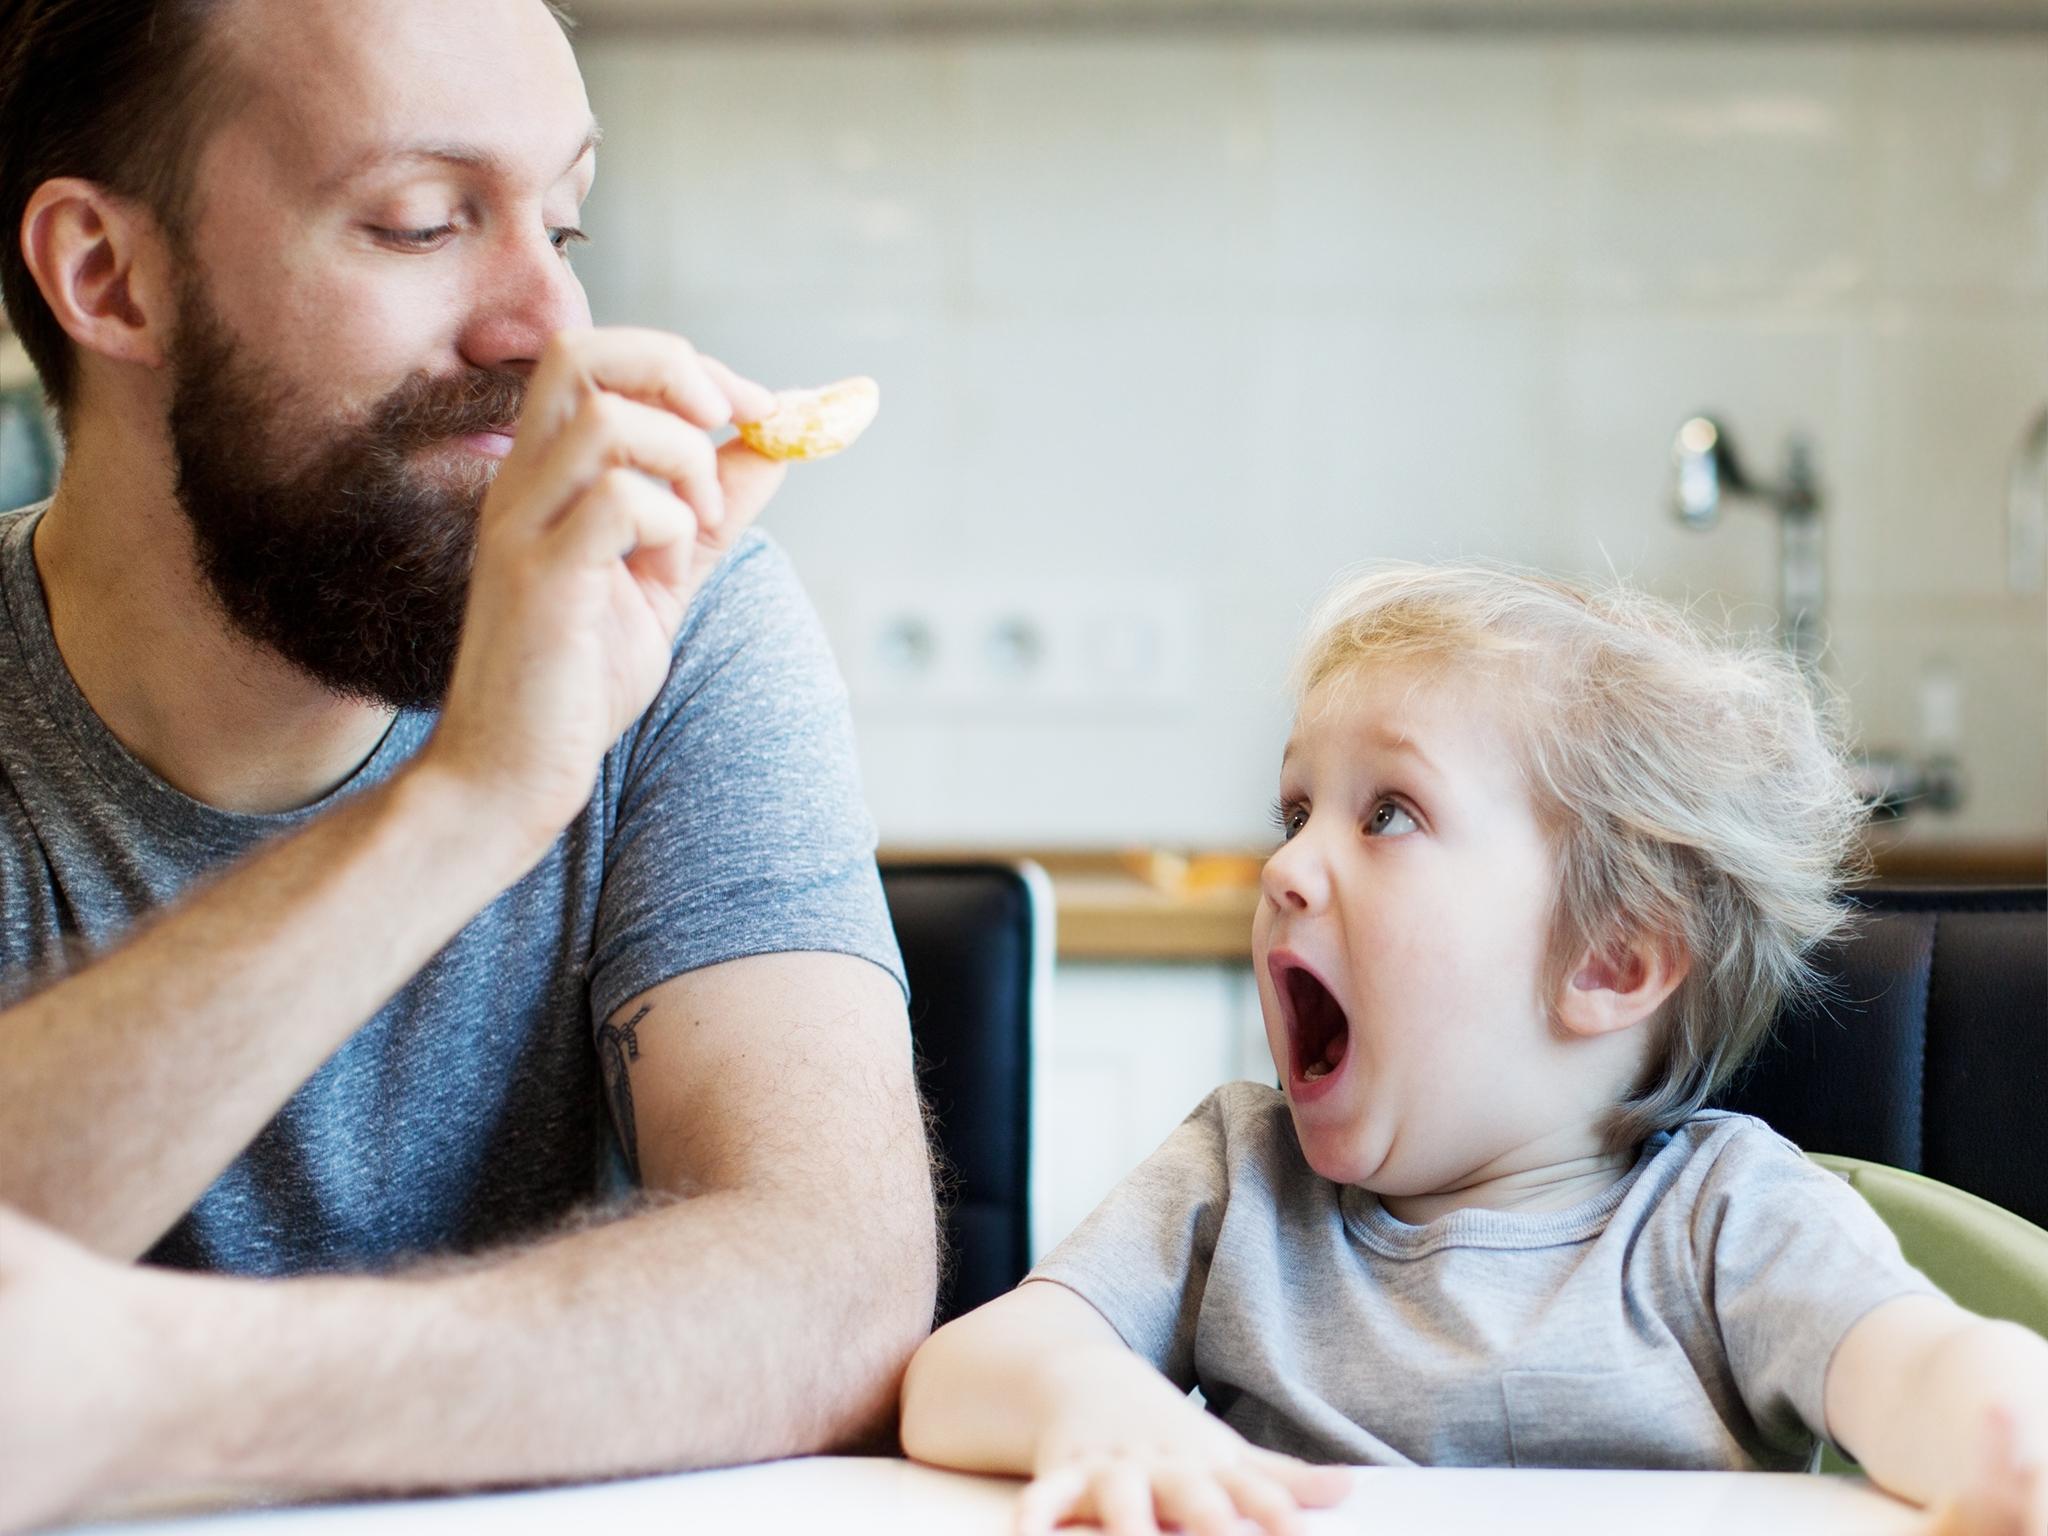 Parents can shape how their child acts towards food